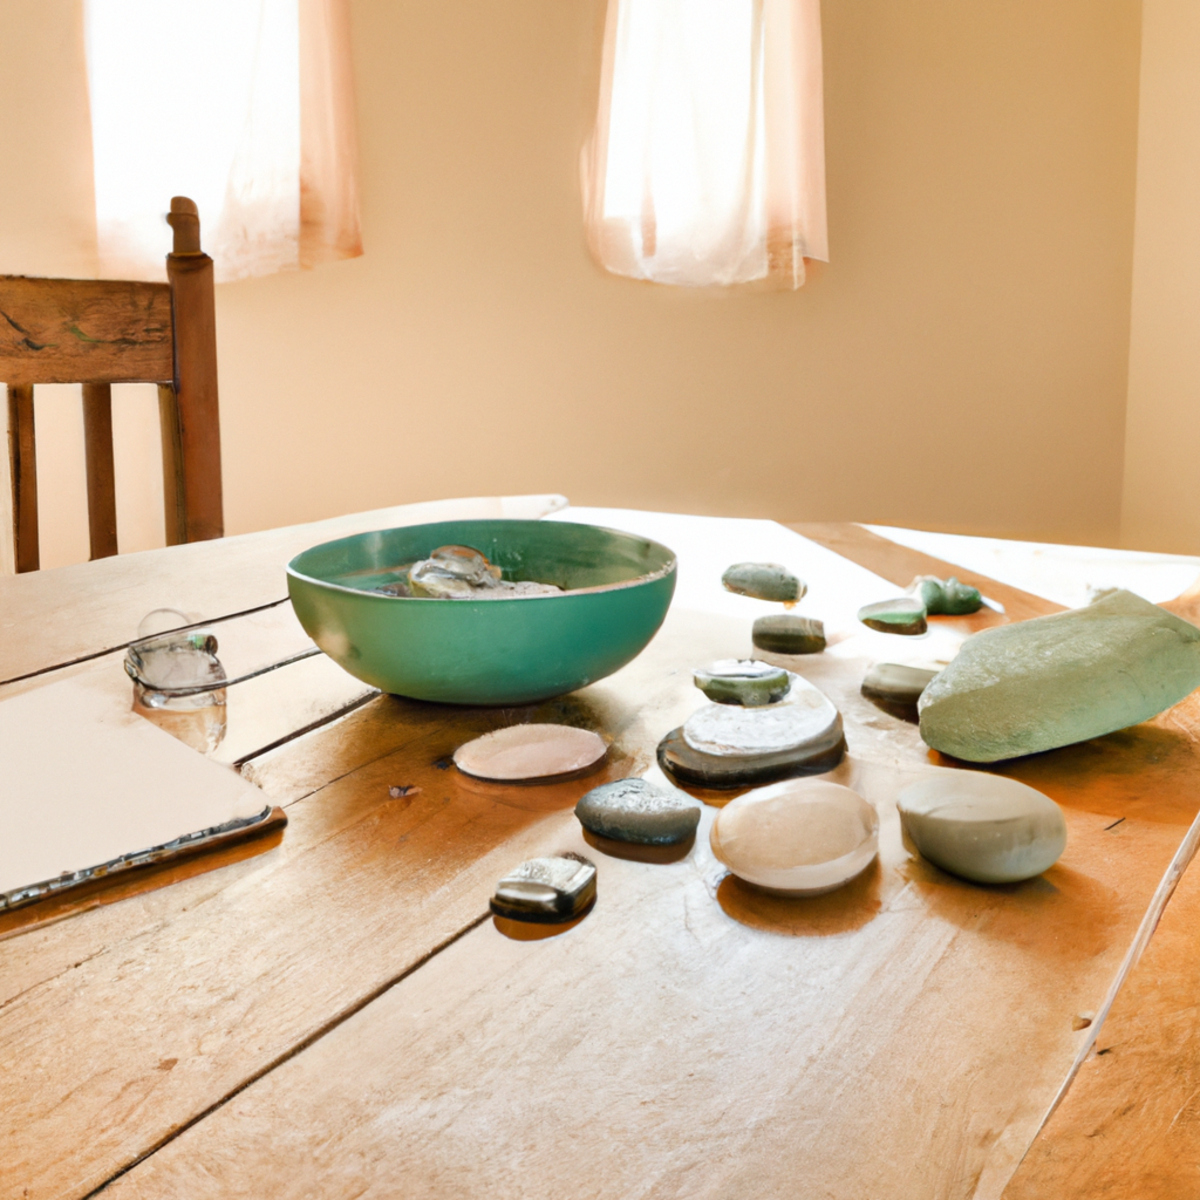 A serene room with natural light flooding in, showcasing a self-care routine with stones, yoga mat, books, candle, tea, and journal.